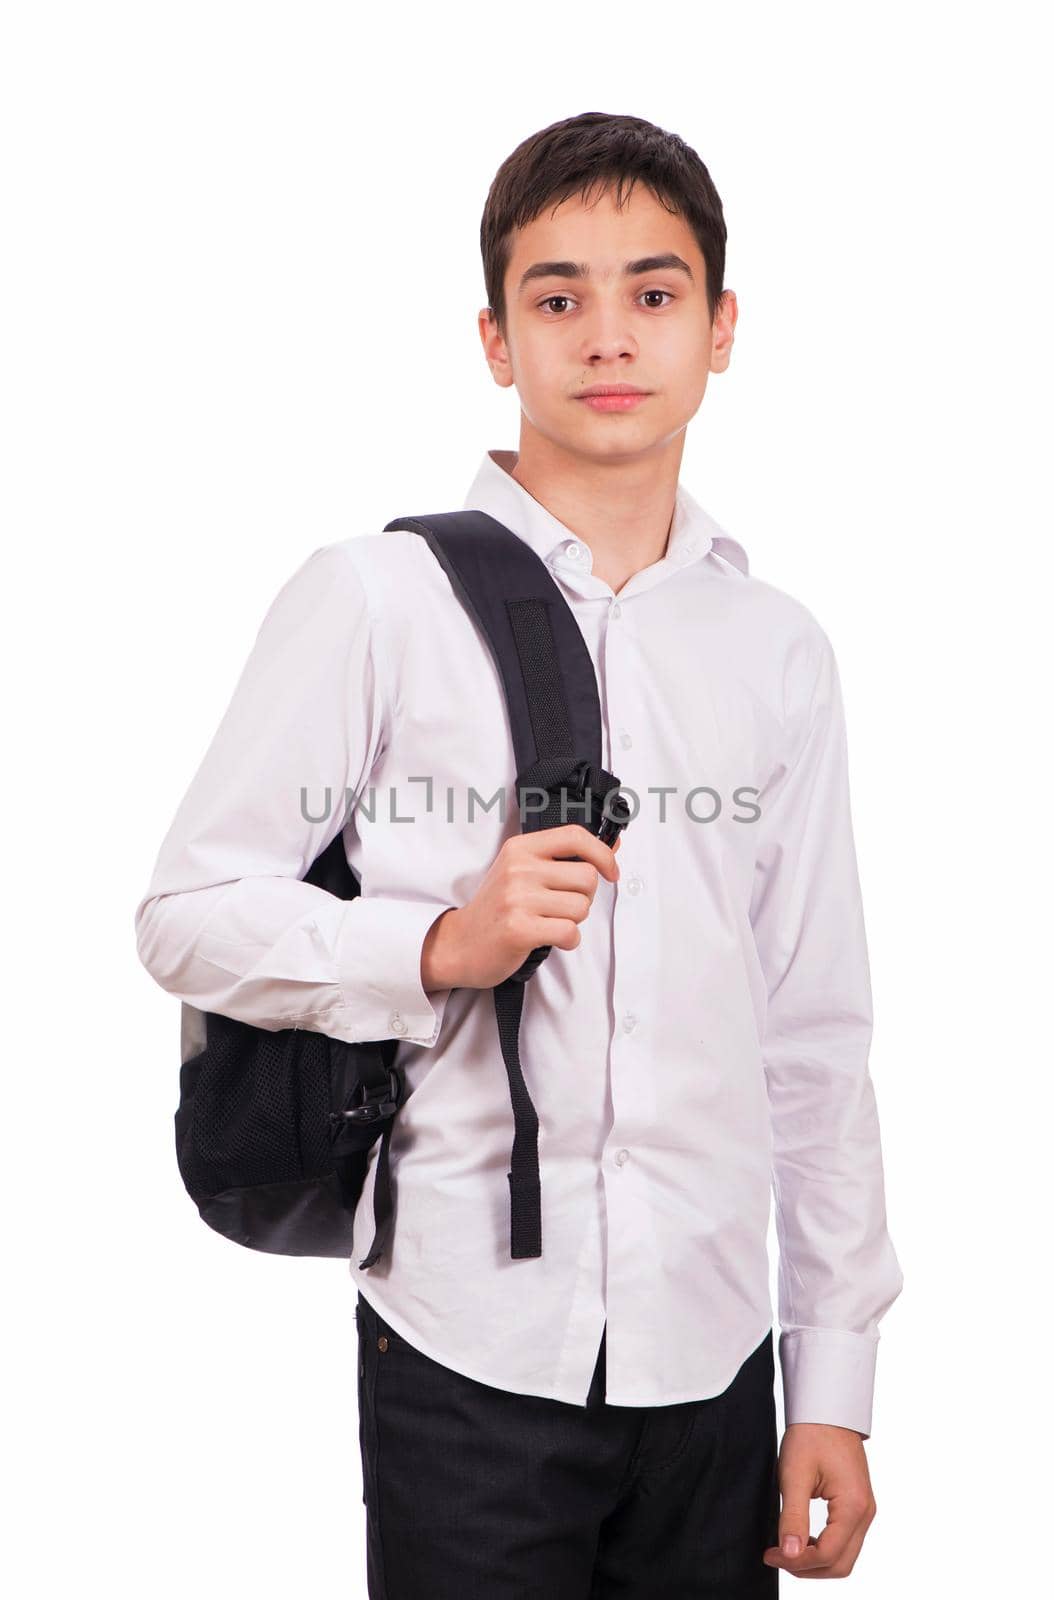 schoolboy in white shirt with backpack isolated on white background.